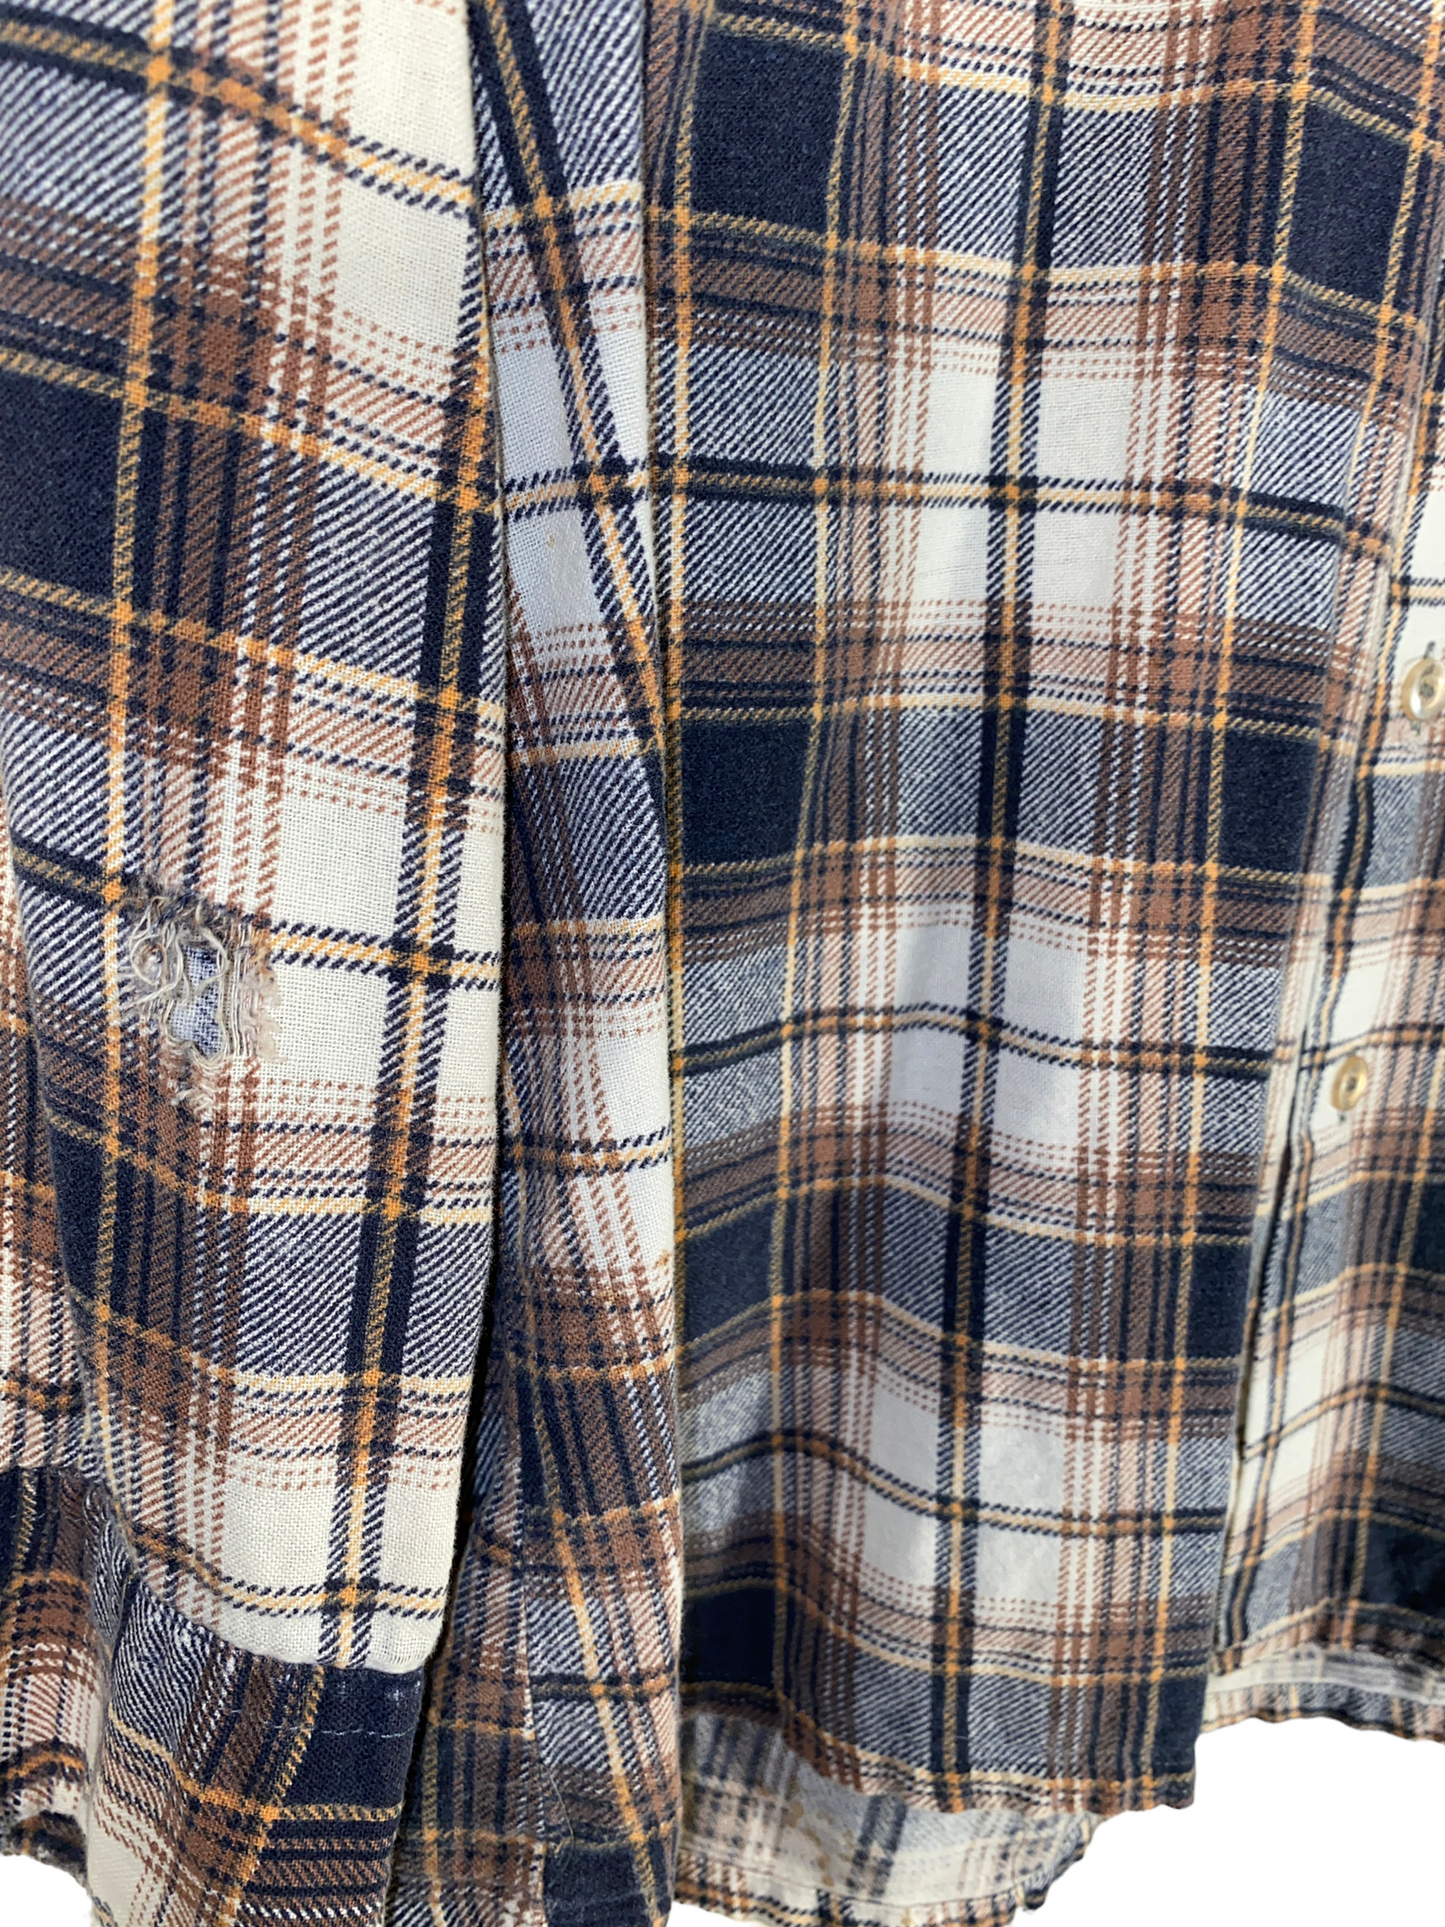 1980s Plaid Flannel by Kingsport